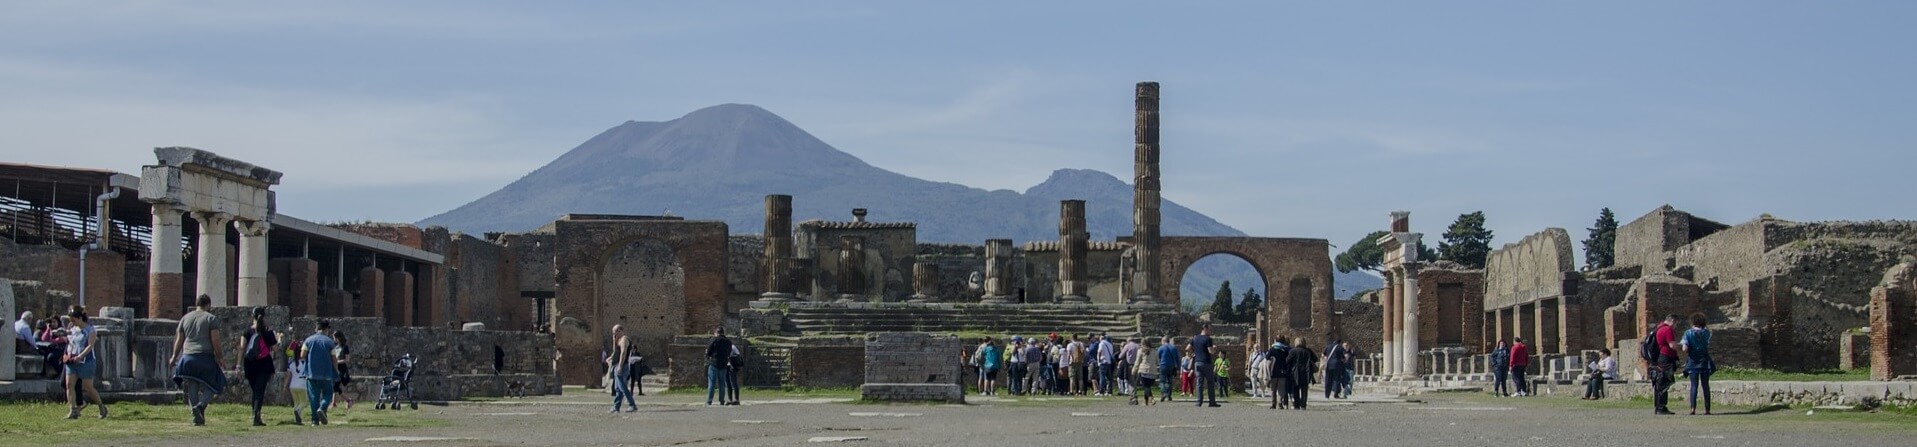 How much does it cost to enter Pompeii?